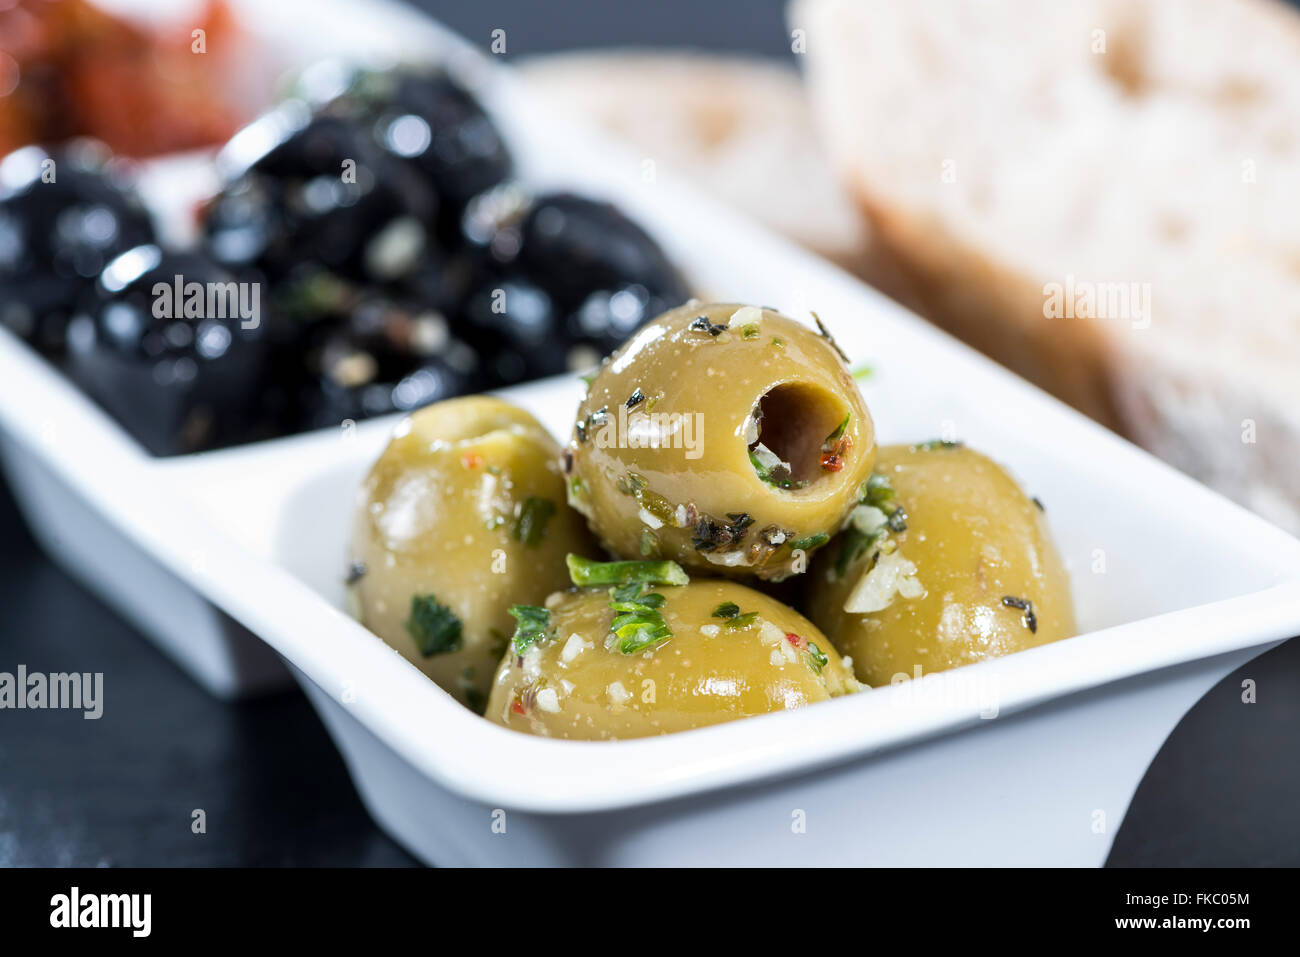 Mixed Olives (black and green ones) marinated with garlic and fresh Mediterranean herbs Stock Photo